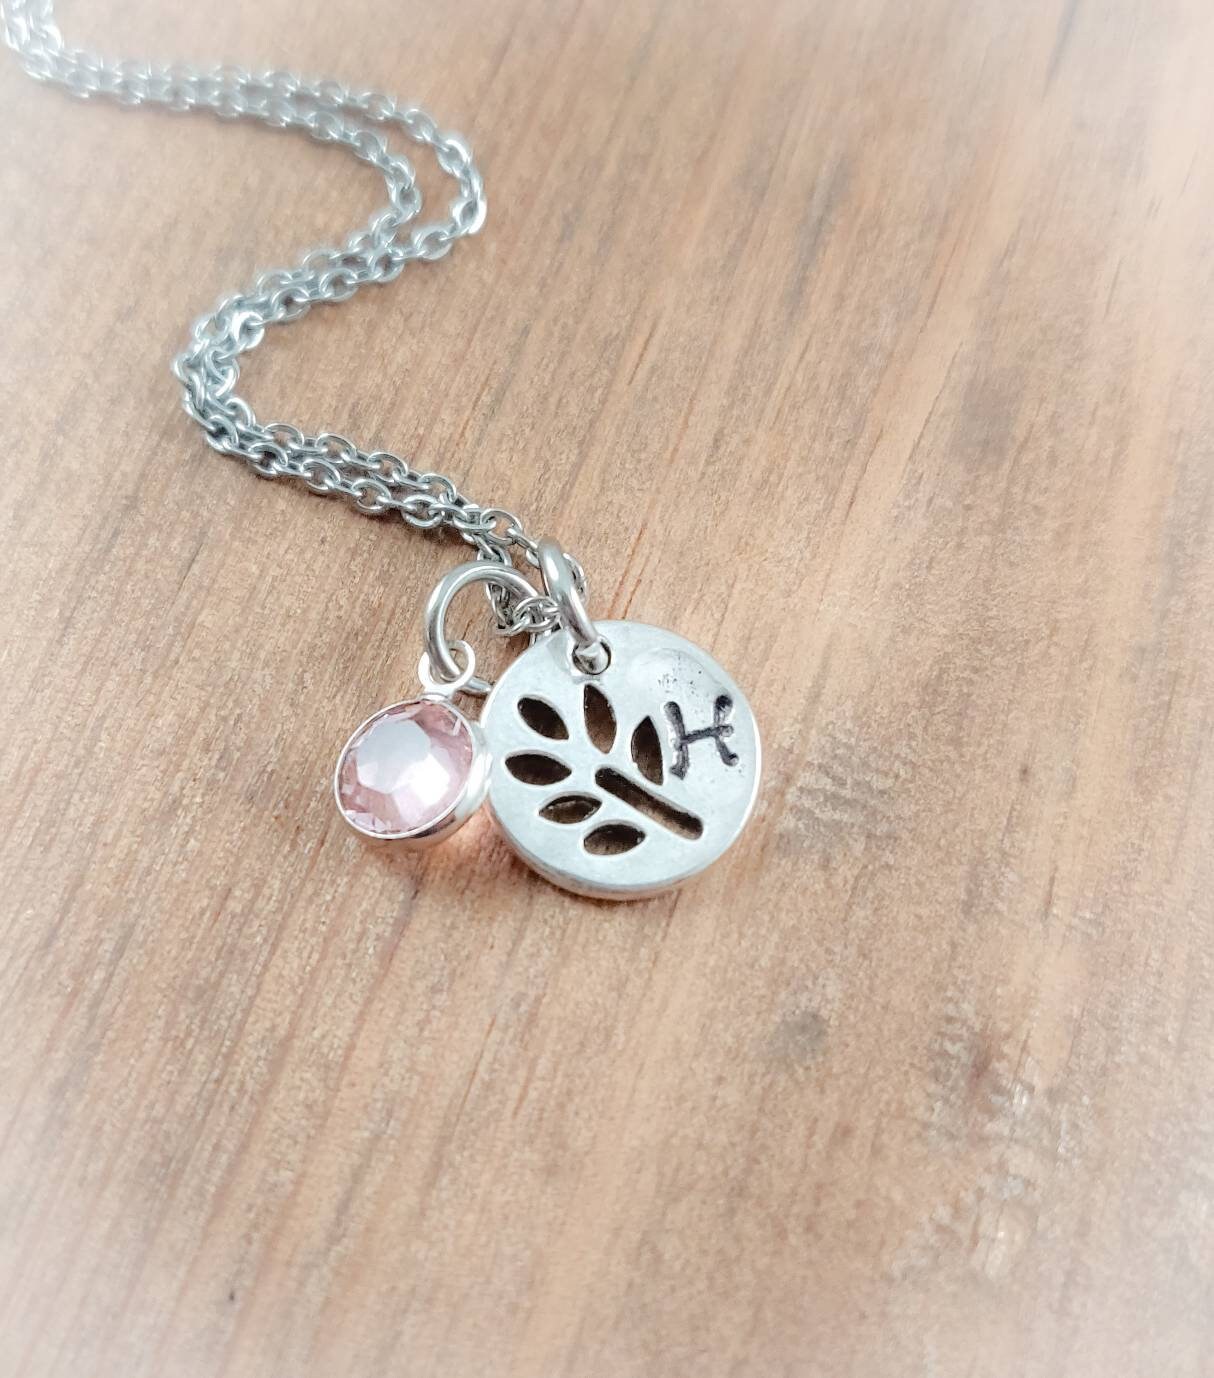 Initial Birthstone Necklace, Initial Leaf Necklace, Birthstone Necklace for Bridesmaid, Bridesmaid Gift,  Gift for Daughter, Easter Gift